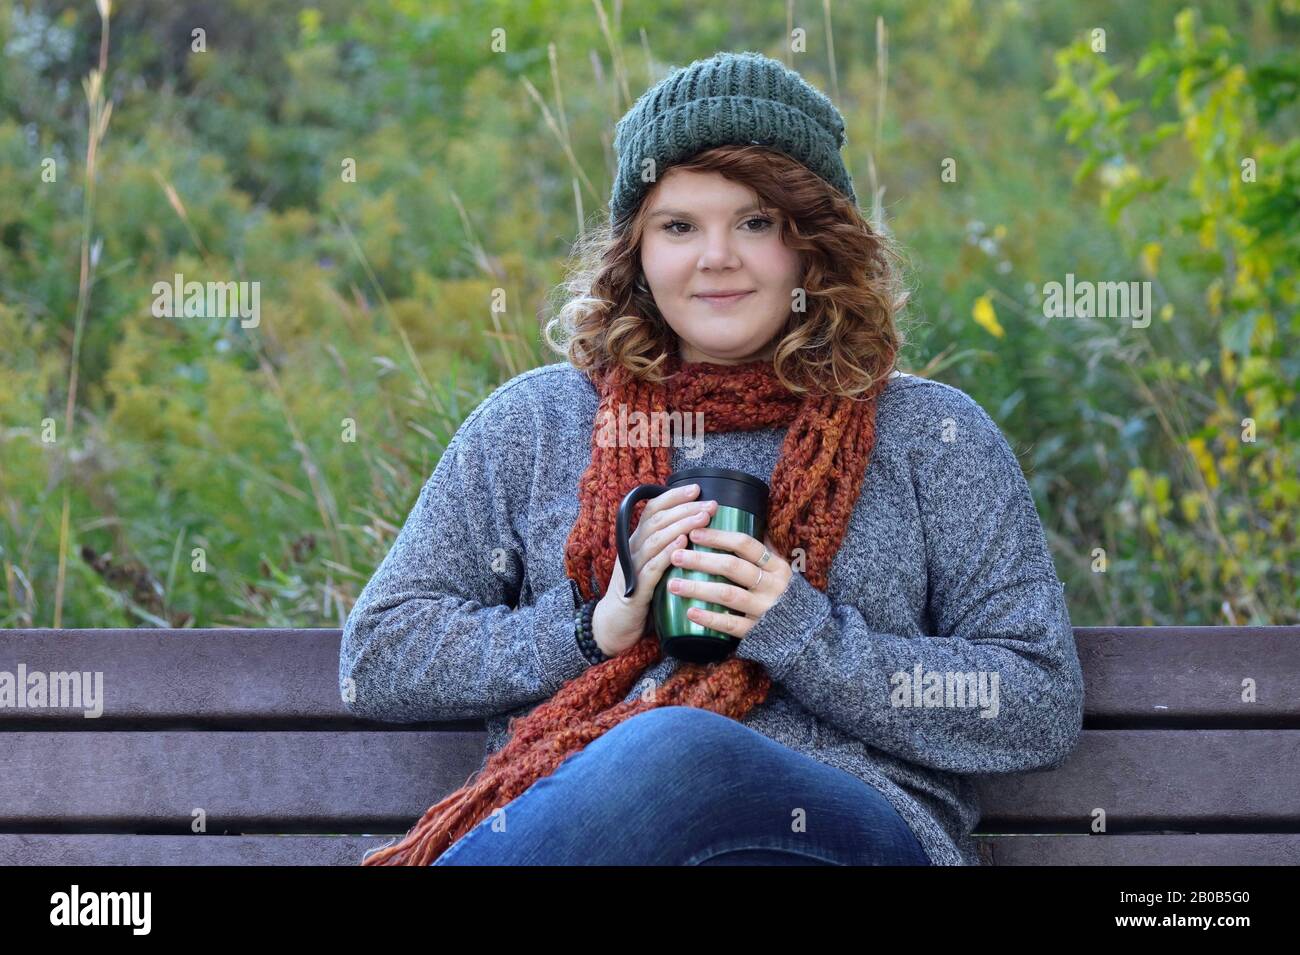 A young woman with red hair enjoying a hot beverage while sitting on a park bench. Stock Photo